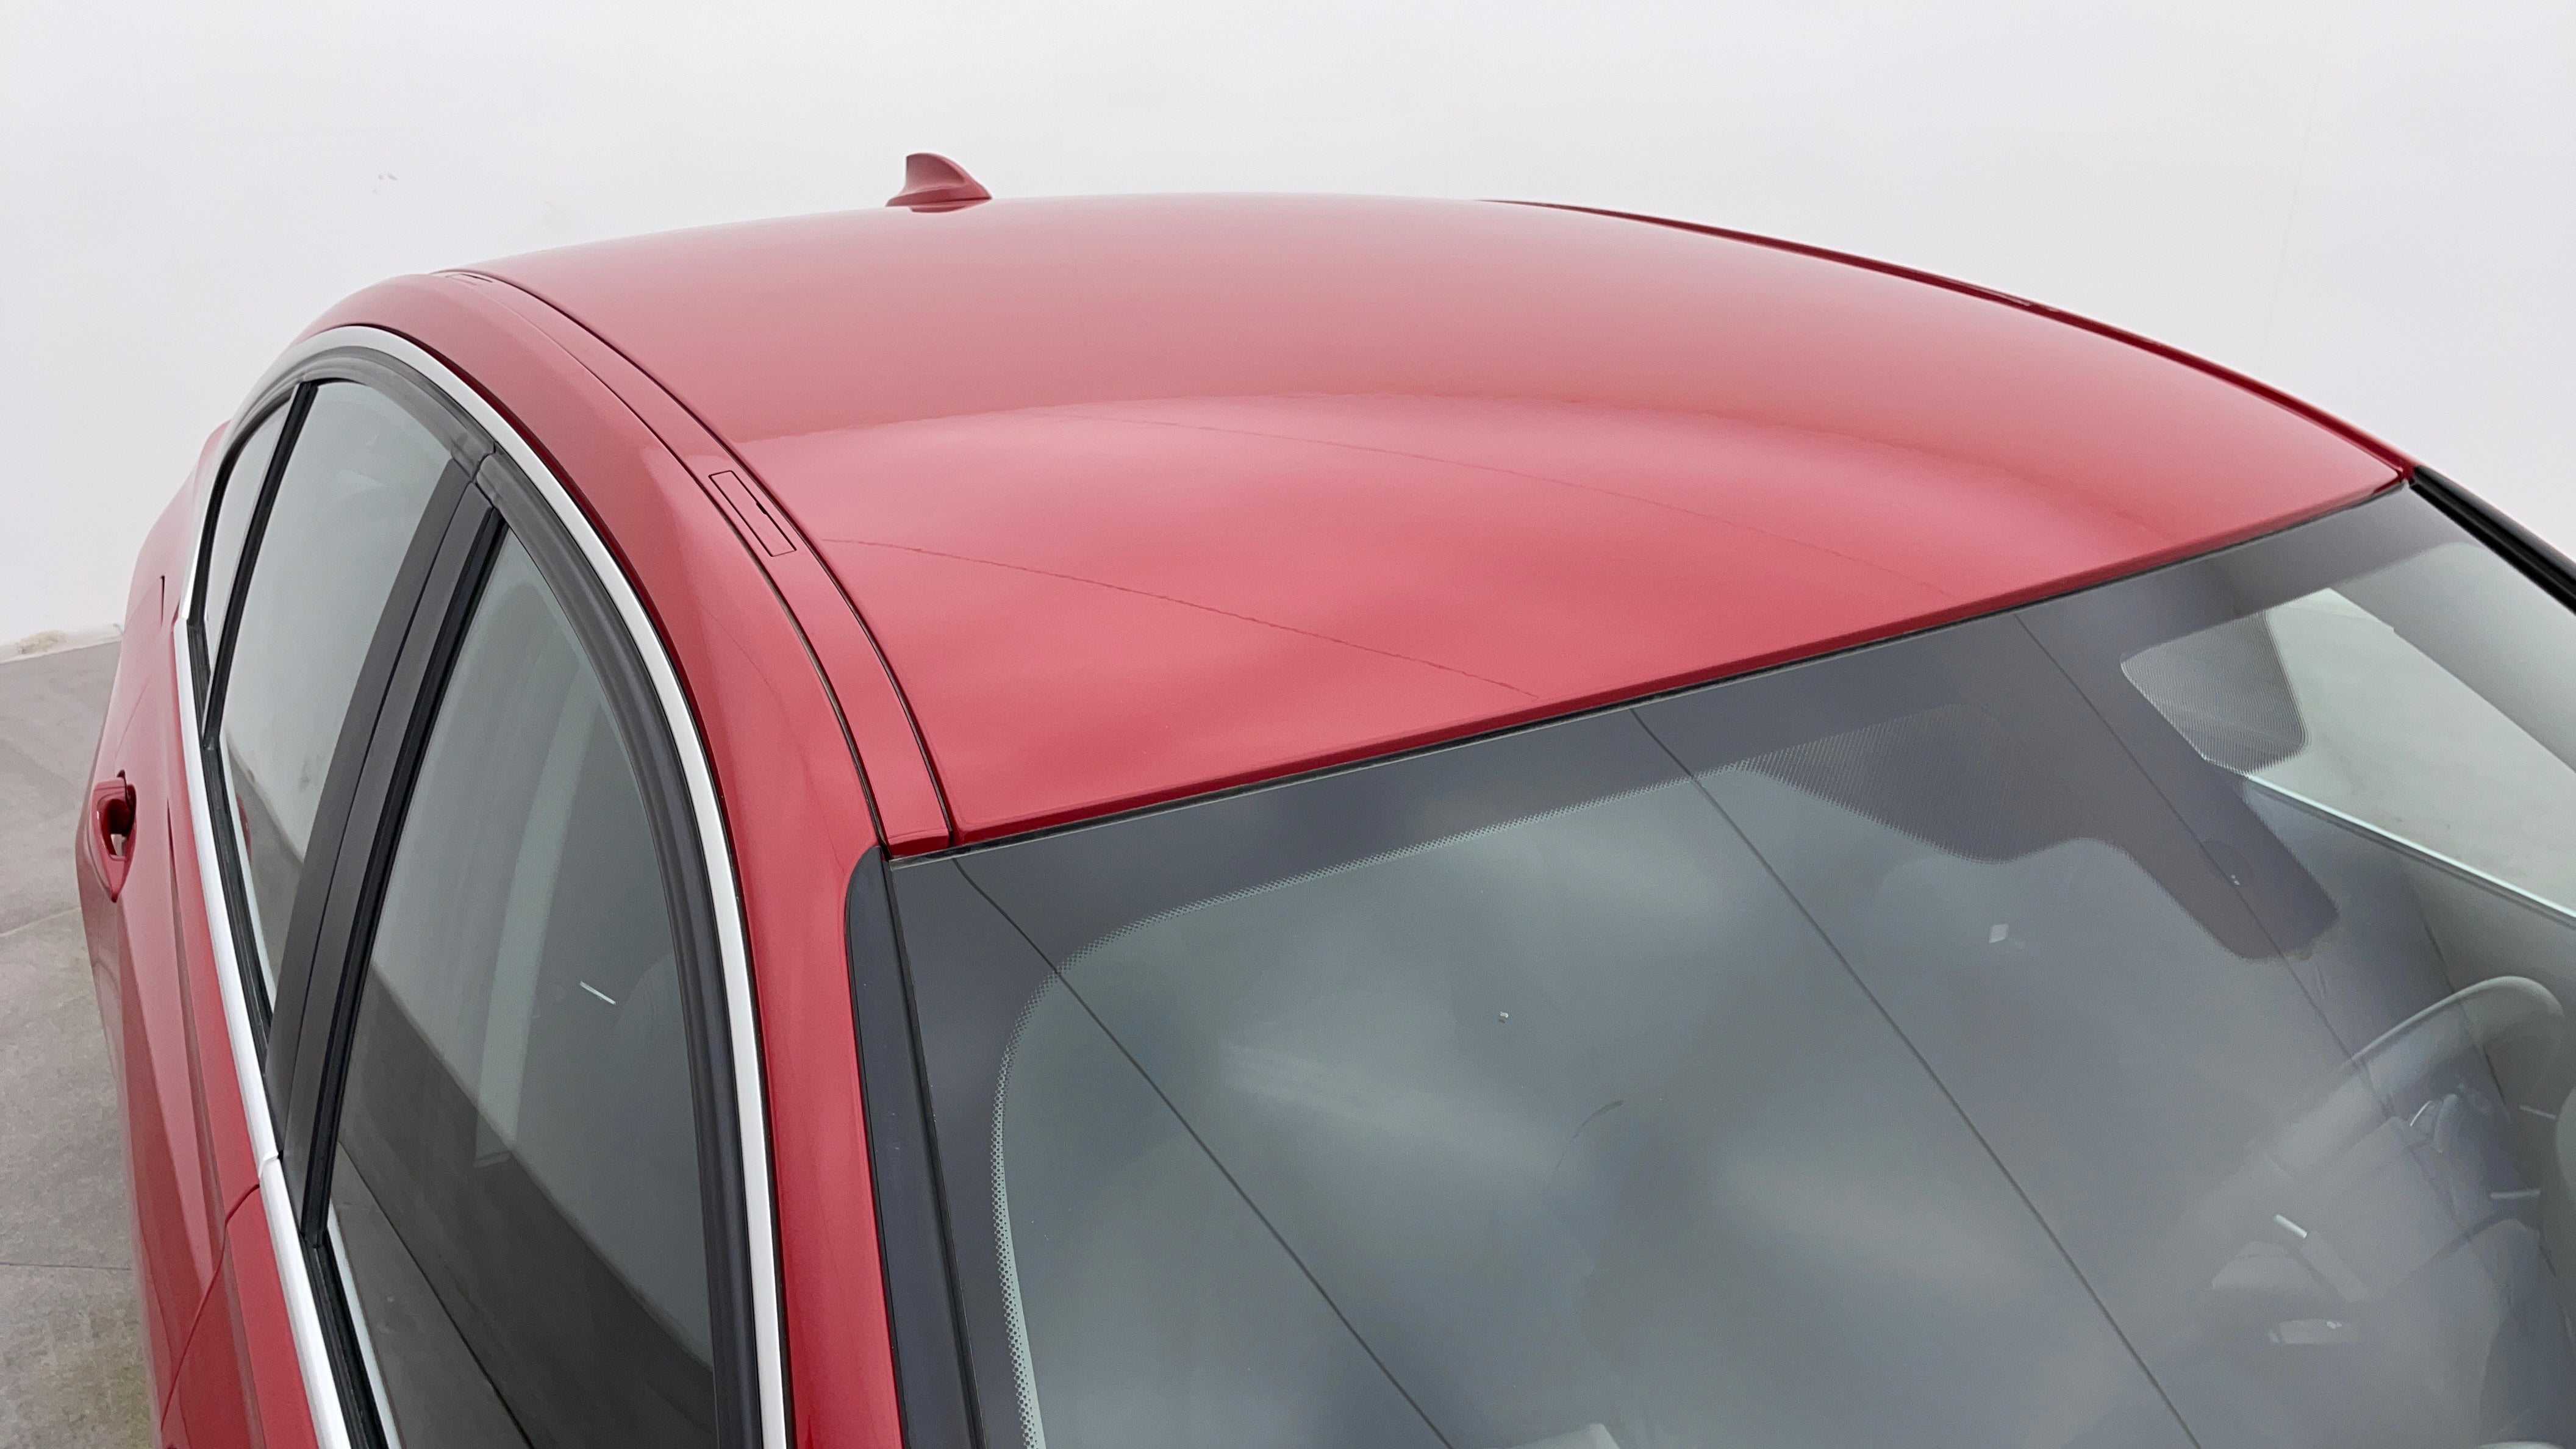 BMW 3 Series-Roof/Sunroof View